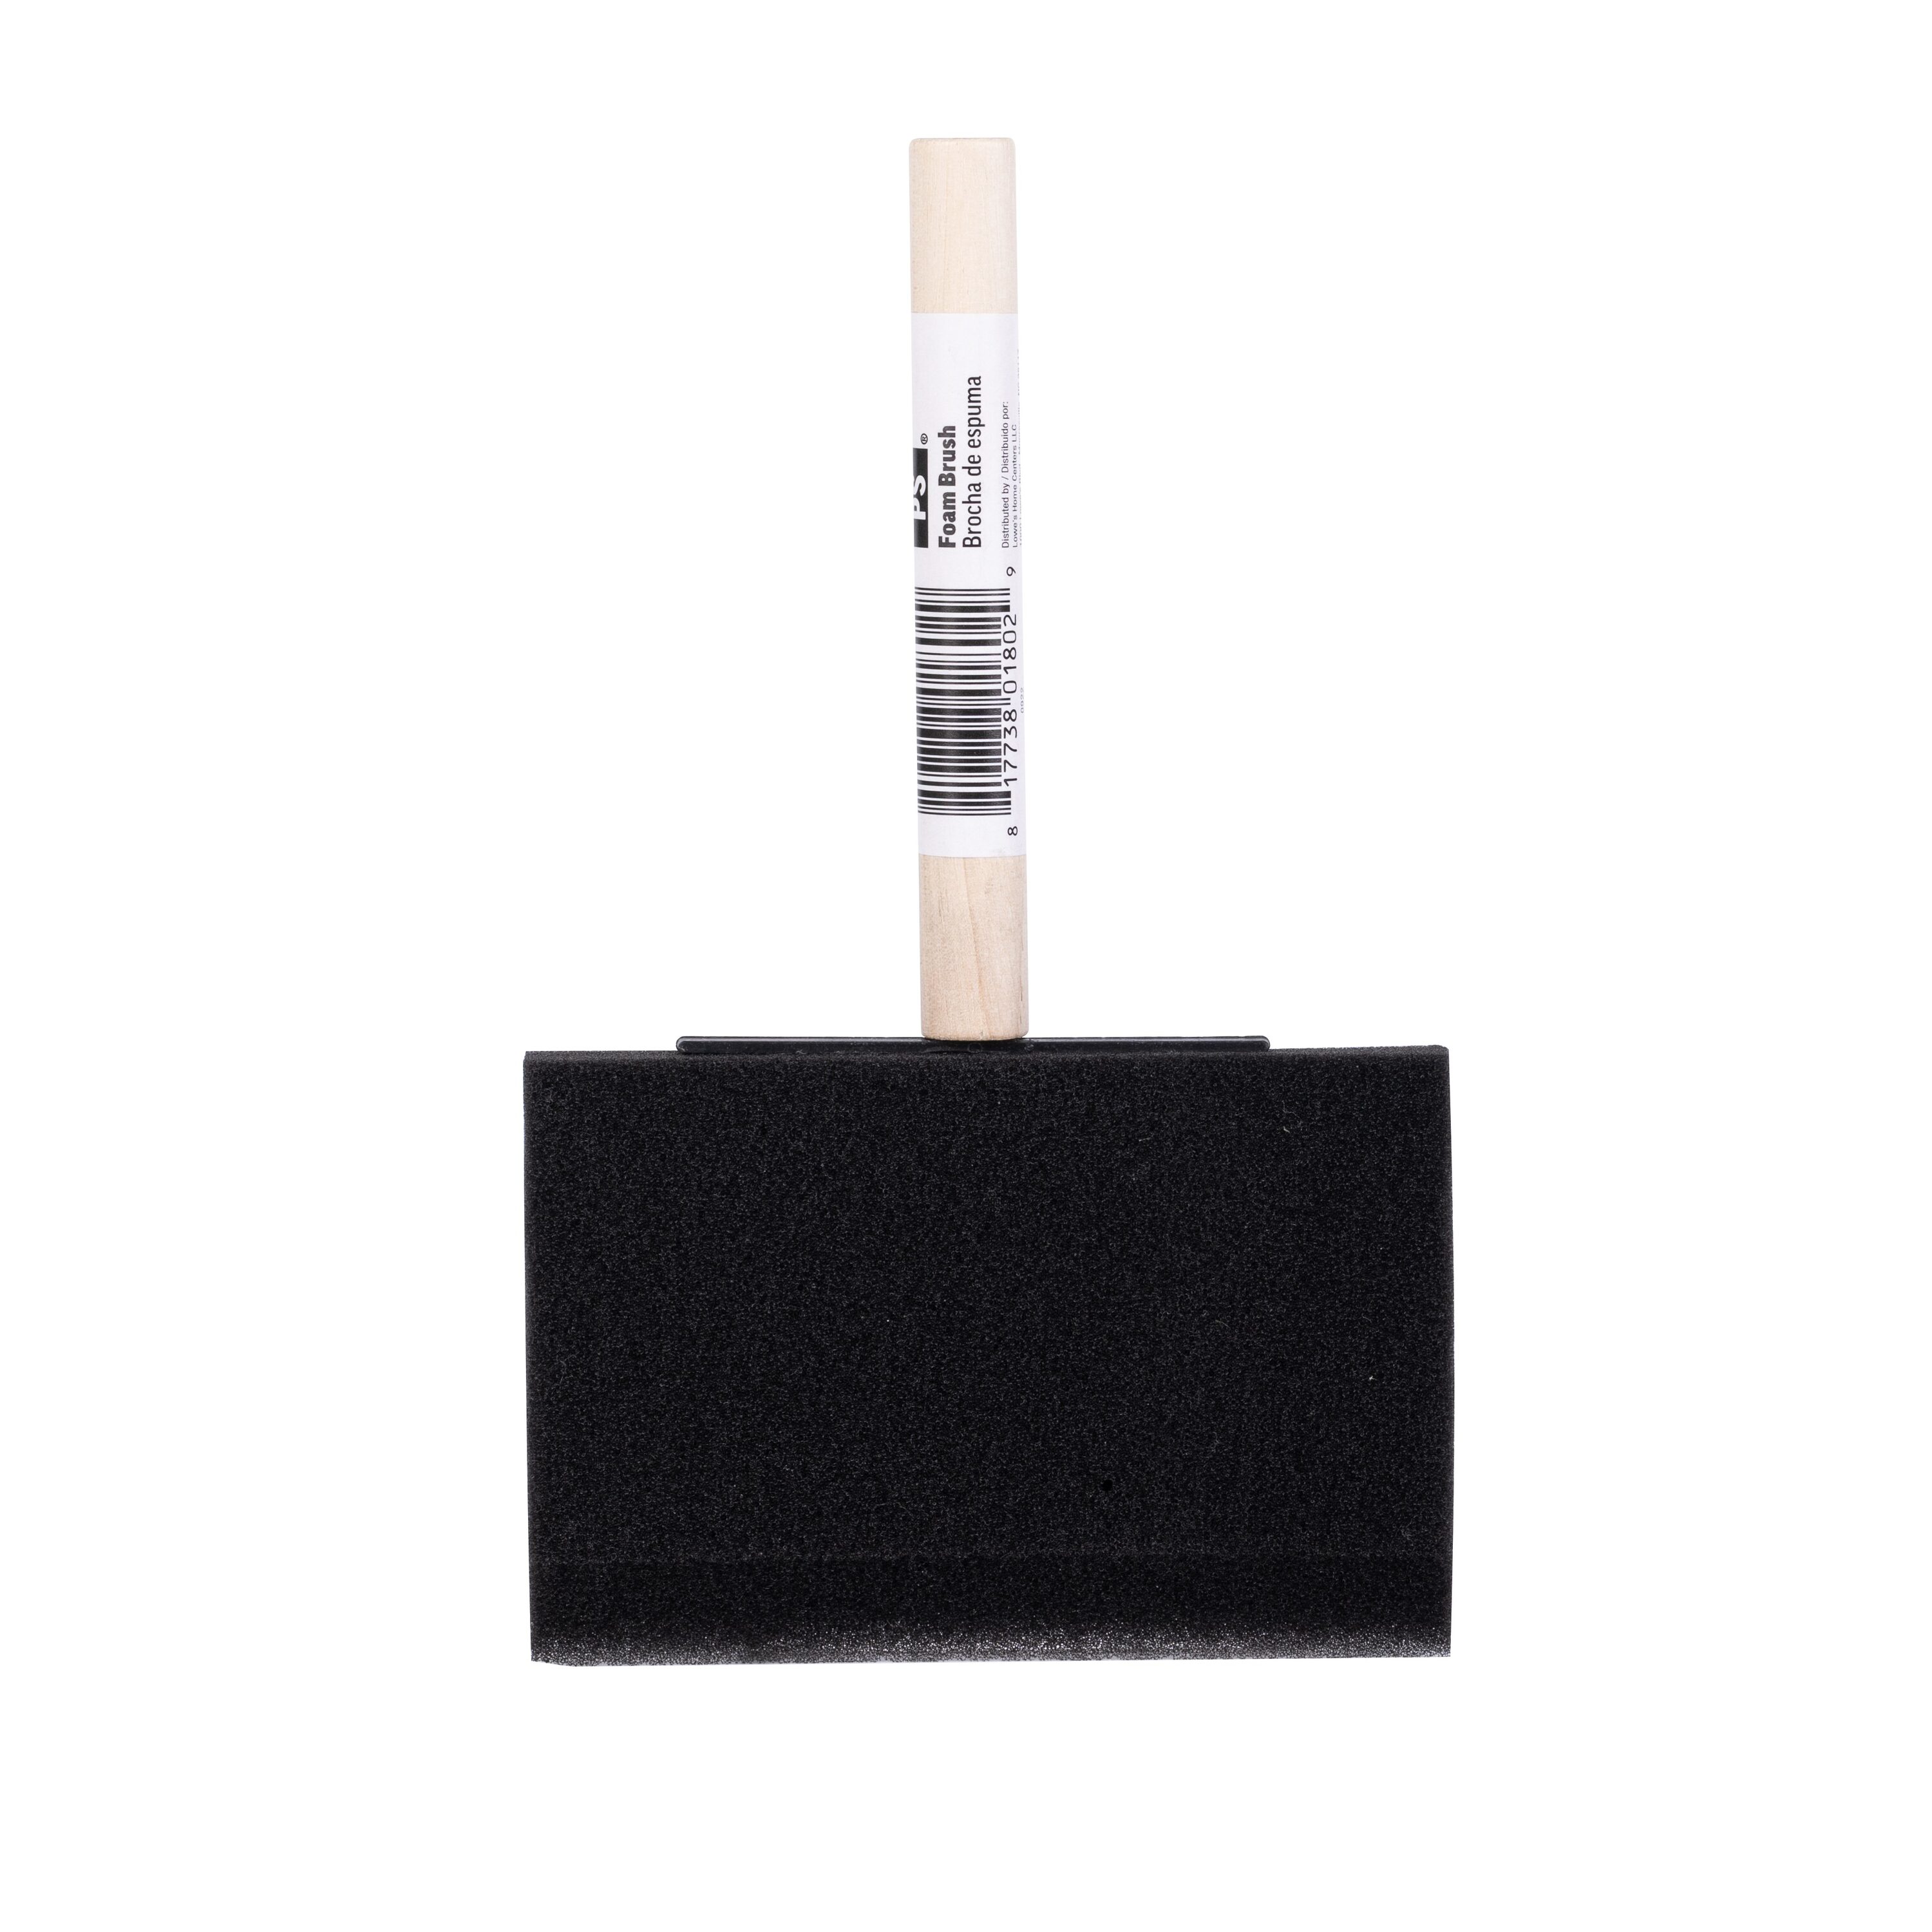 2 inch Foam Brush 24 Pack for Painting Staining Varnishing and General  Finishing Projects Made in The USA